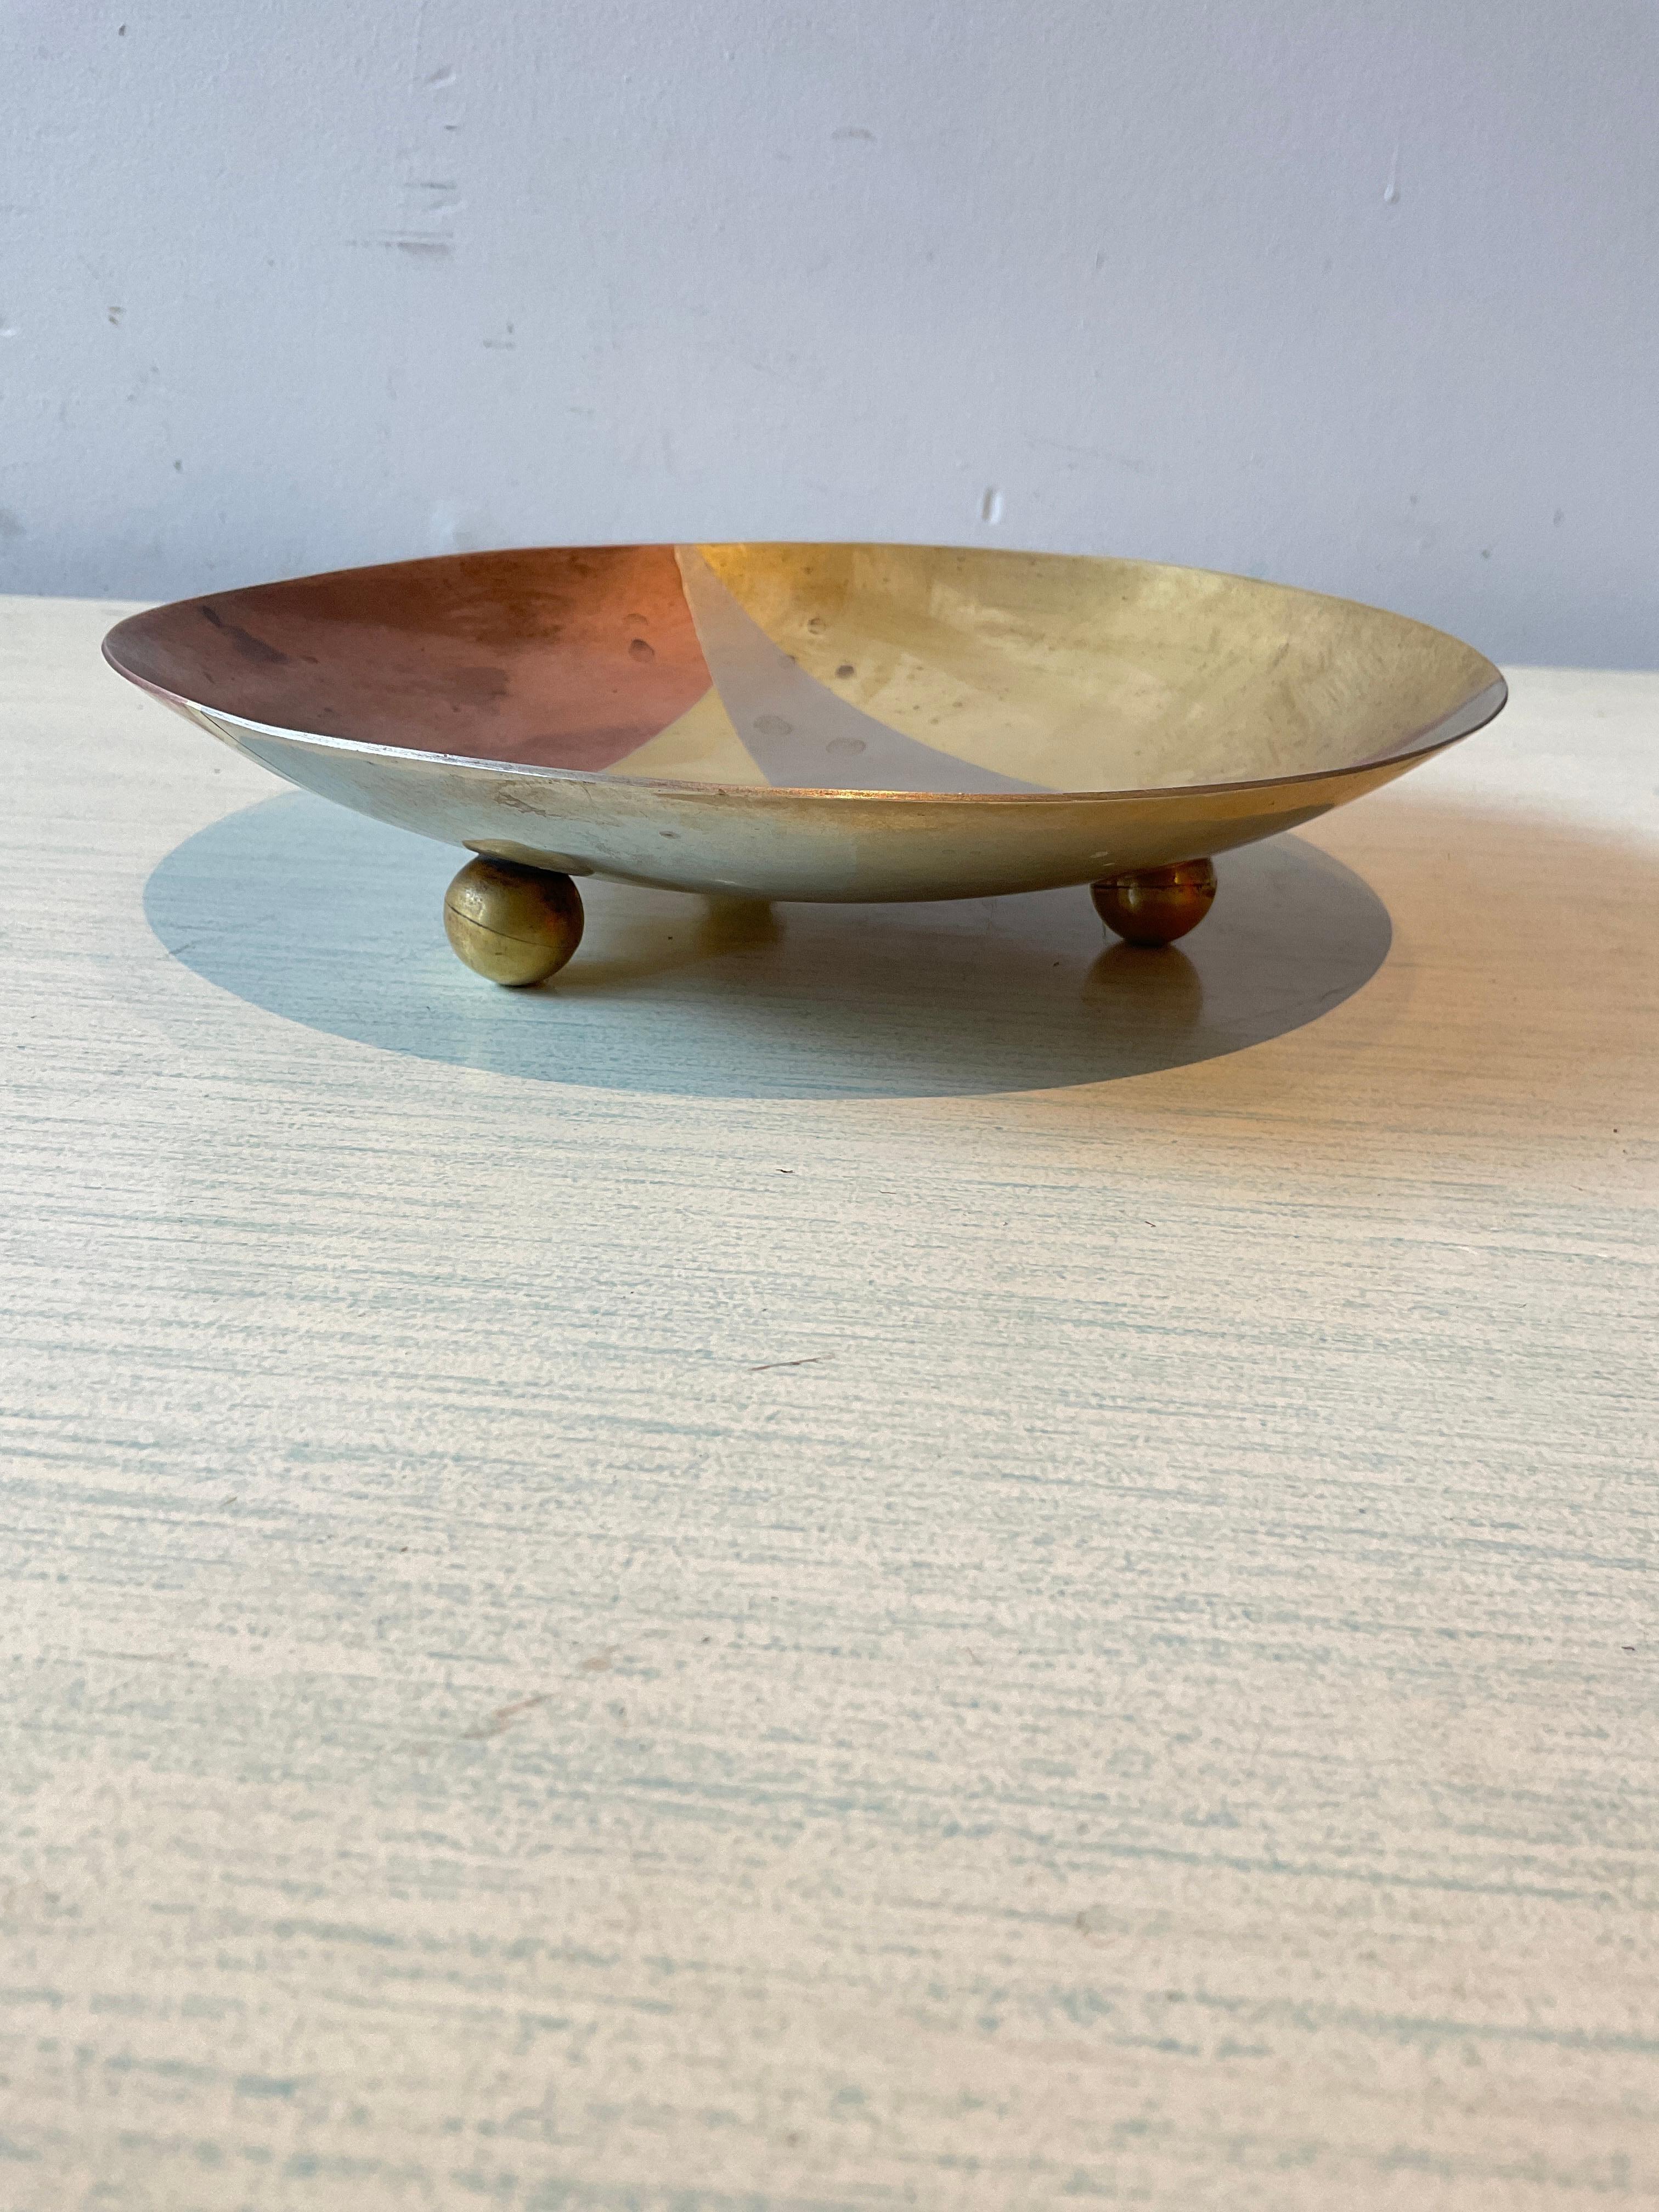 1970s Los Castillo footed bowl,  stain rings on bowl as shown in pictures.